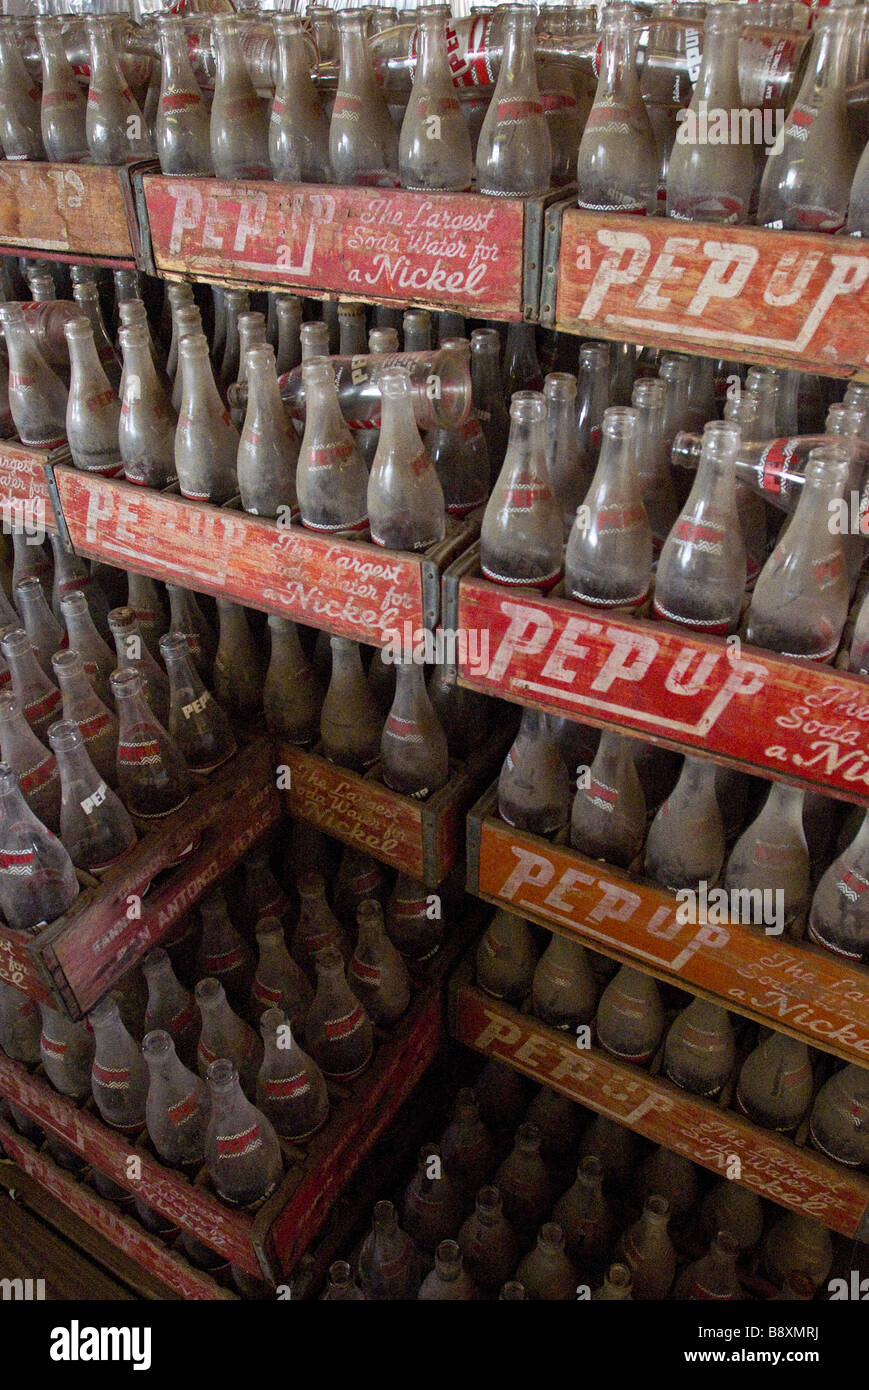 Pep Up soda bottles in wooden cases at the flea market in Canton, Texas. Stock Photo